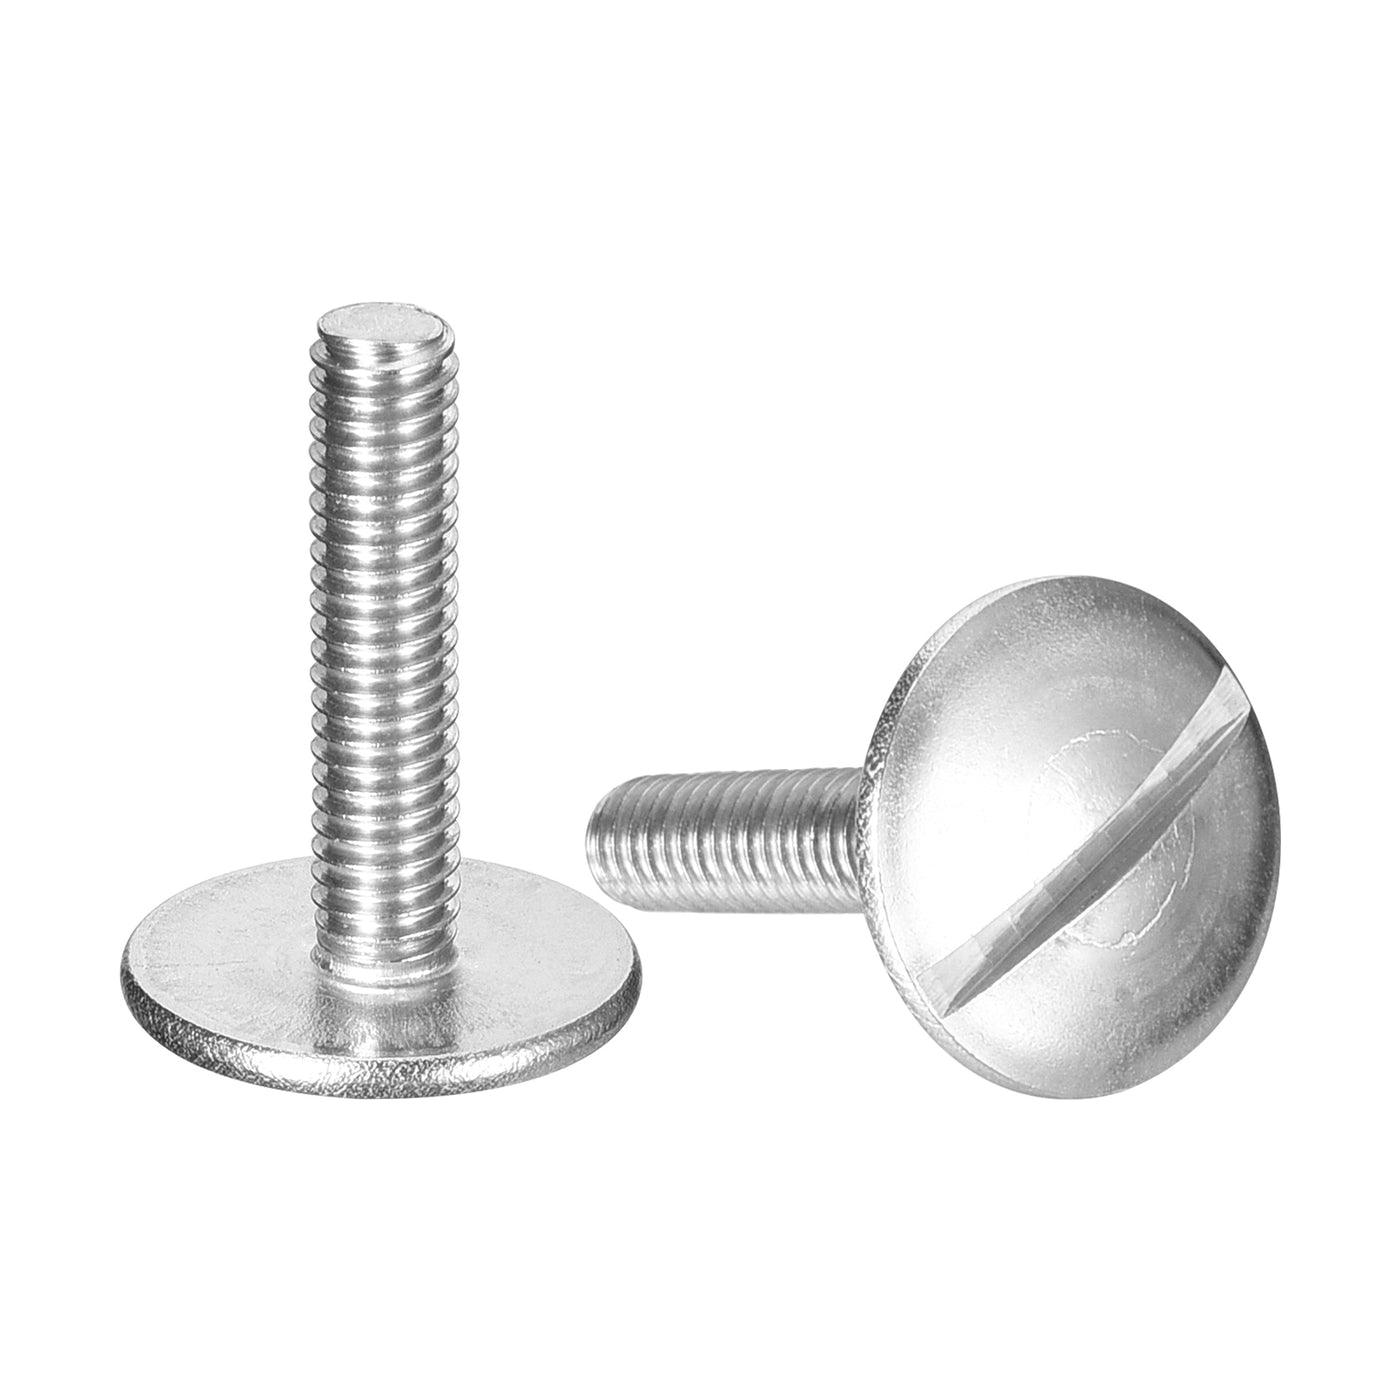 uxcell Uxcell M4x18mm Extra Large Flat Head Slotted Screws, 5pcs 304 Stainless Steel Bolts